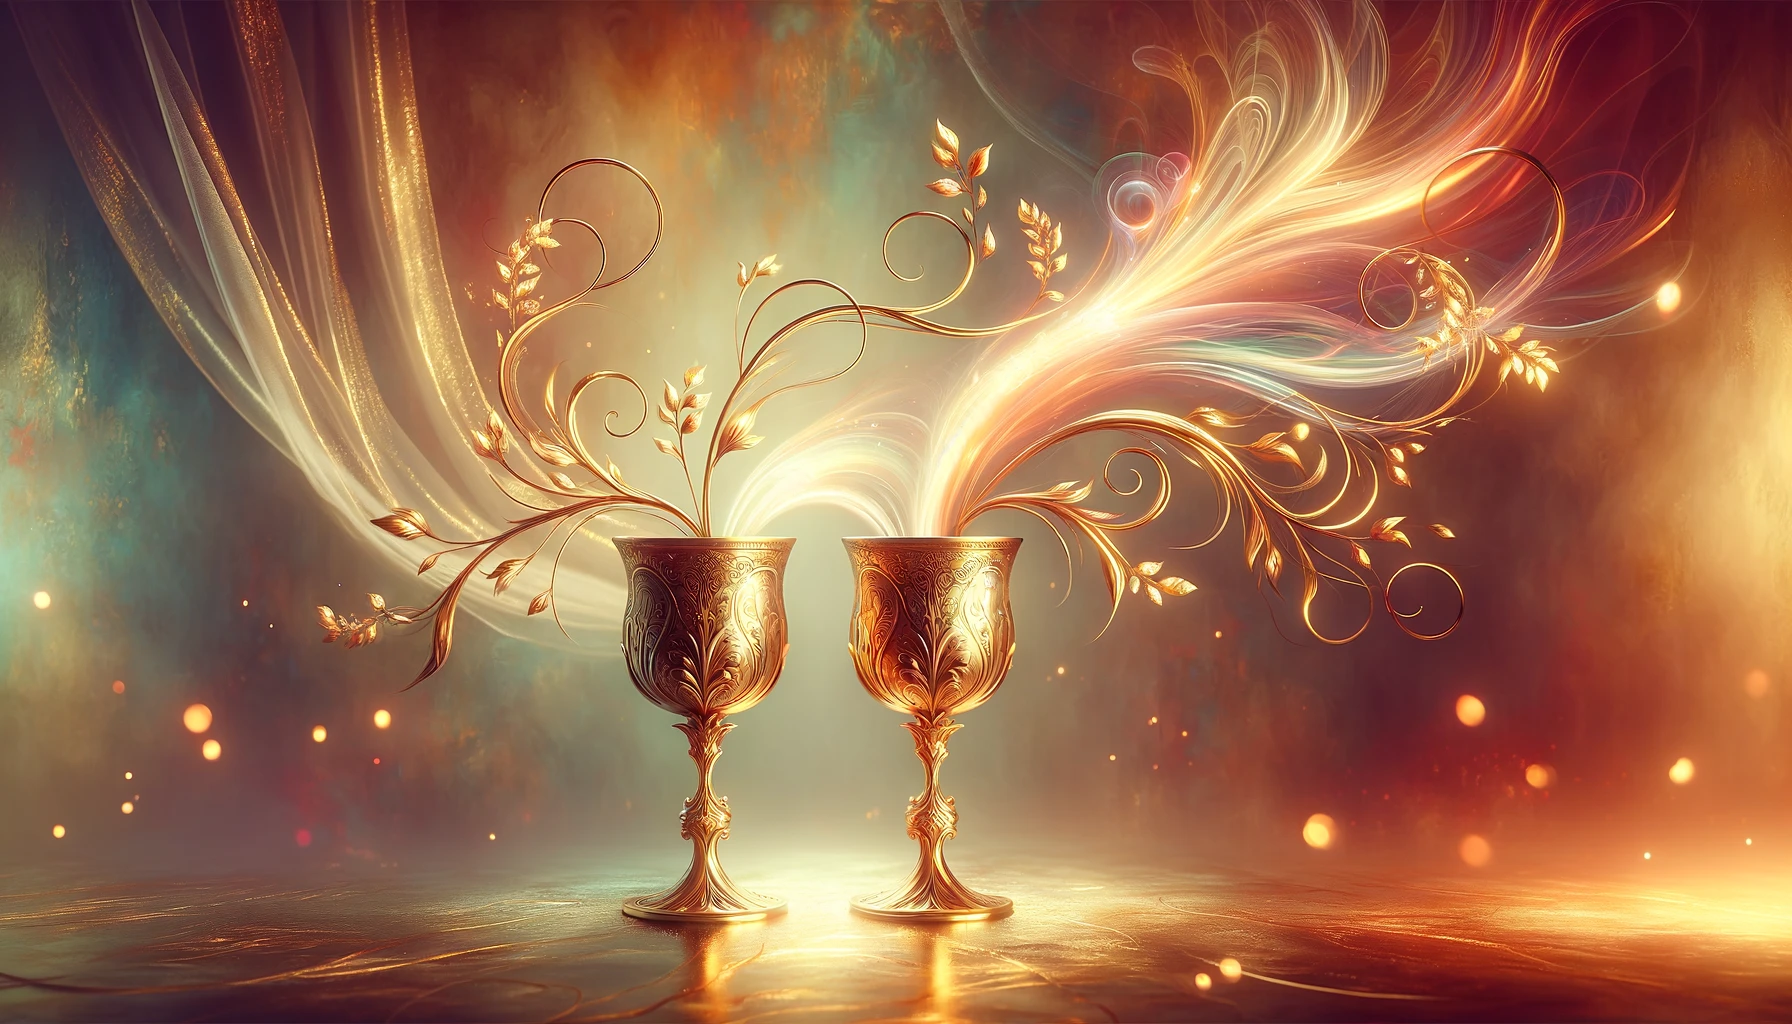 Two elegant gold adorned chalices intertwined with delicate vines set in a romantic serene backdrop. The chalices overflow with vibrant swirling